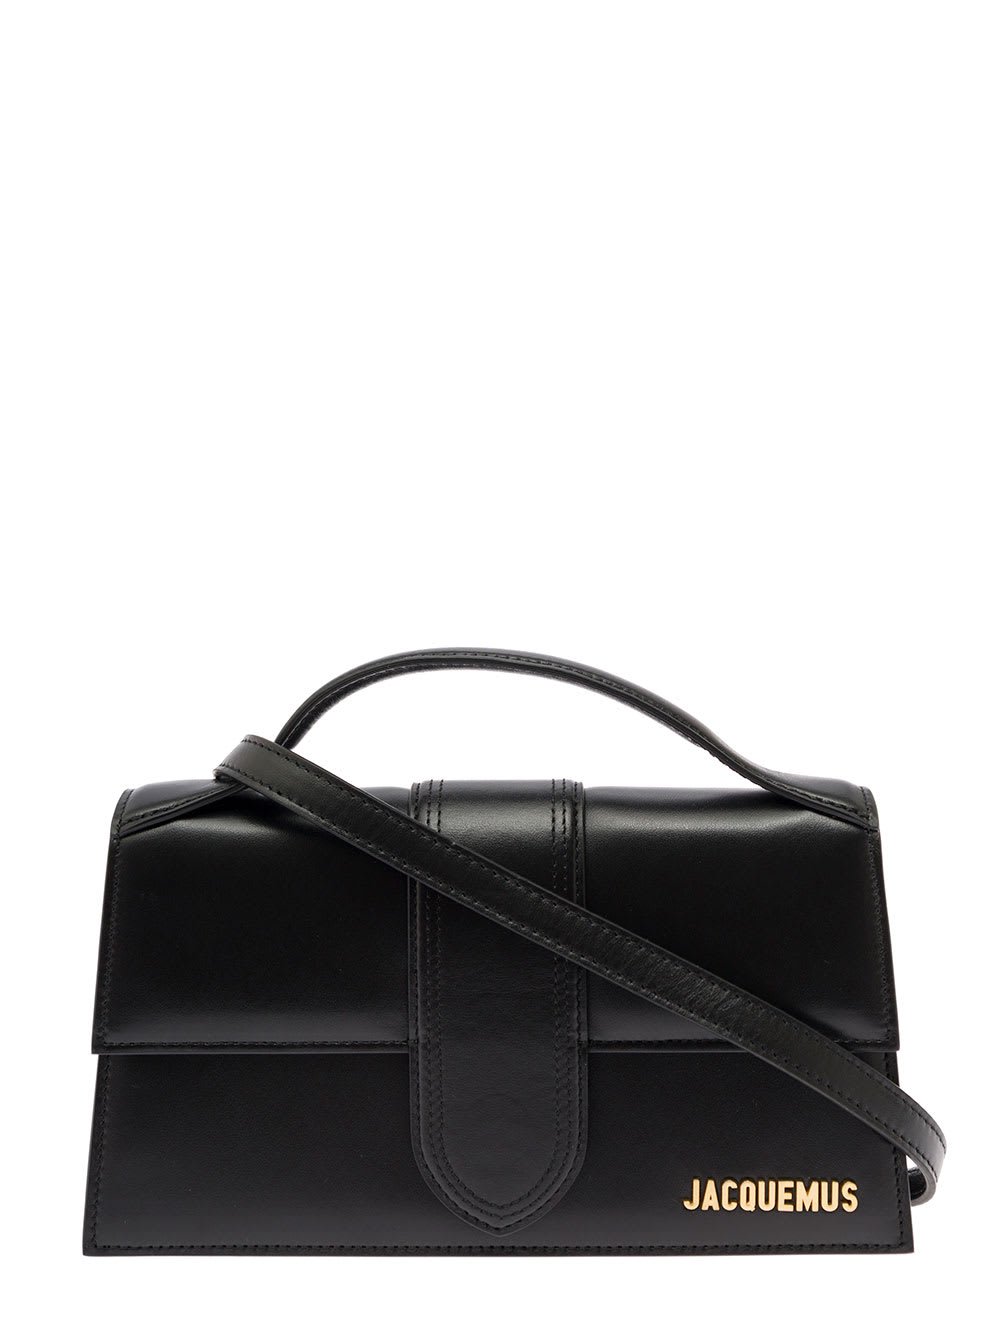 JACQUEMUS LE GRAND BAMBINO BLACK HANDBAG WITH REMOVABLE SHOULDER STRAP IN LEATHER WOMAN